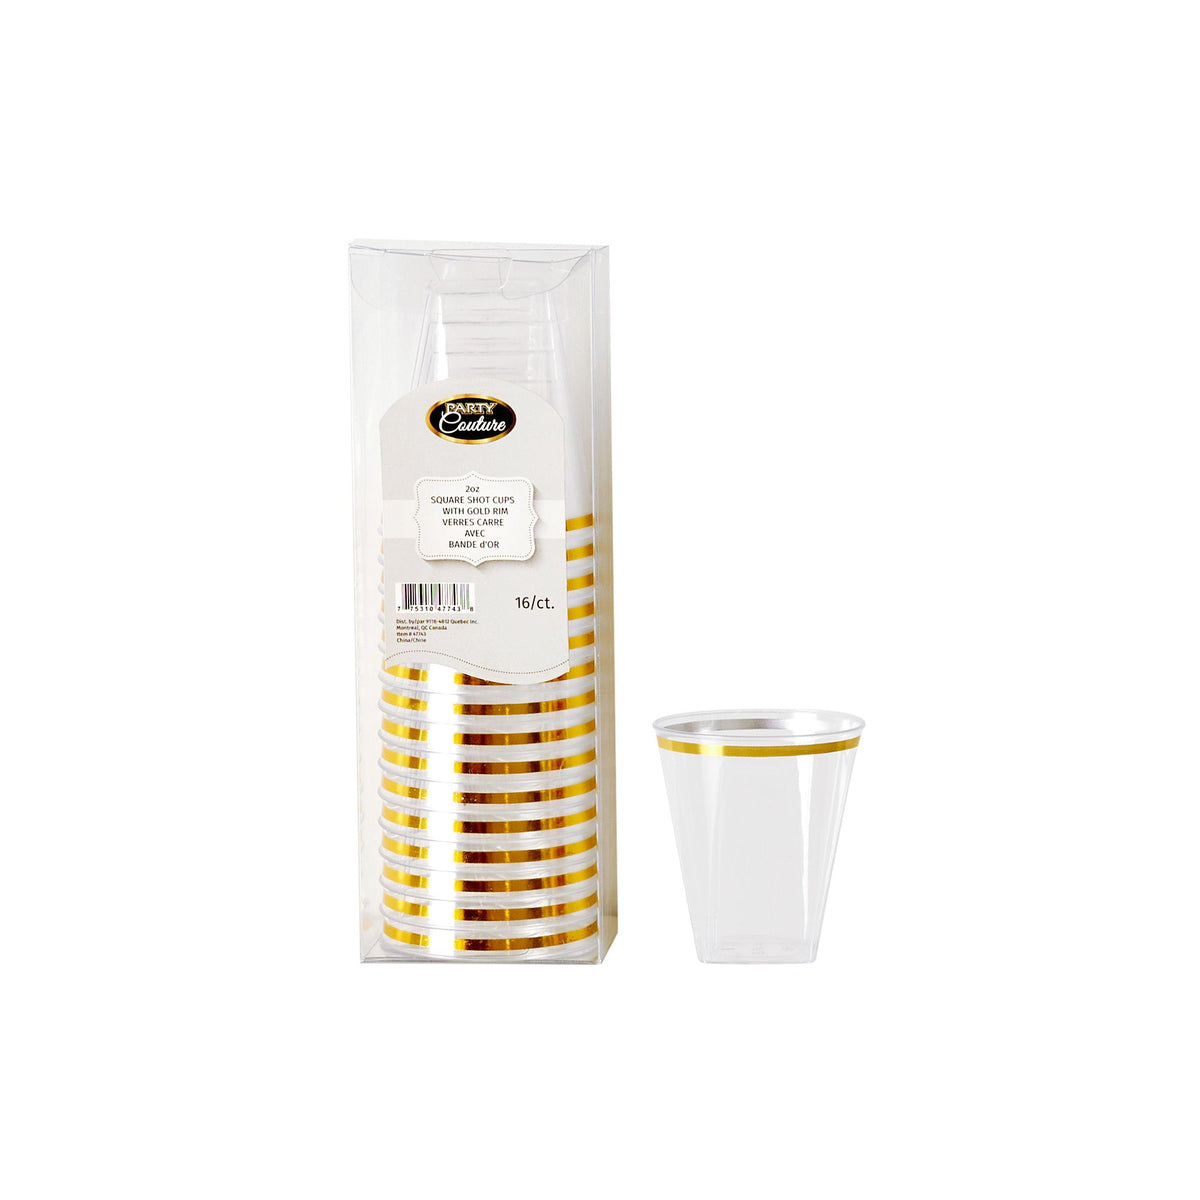 MADISON IMPORTS Disposable-Plasticware Clear Premium Quality Square Shot Cups with Gold Rim, 2 oz, 16 Count 775310477438